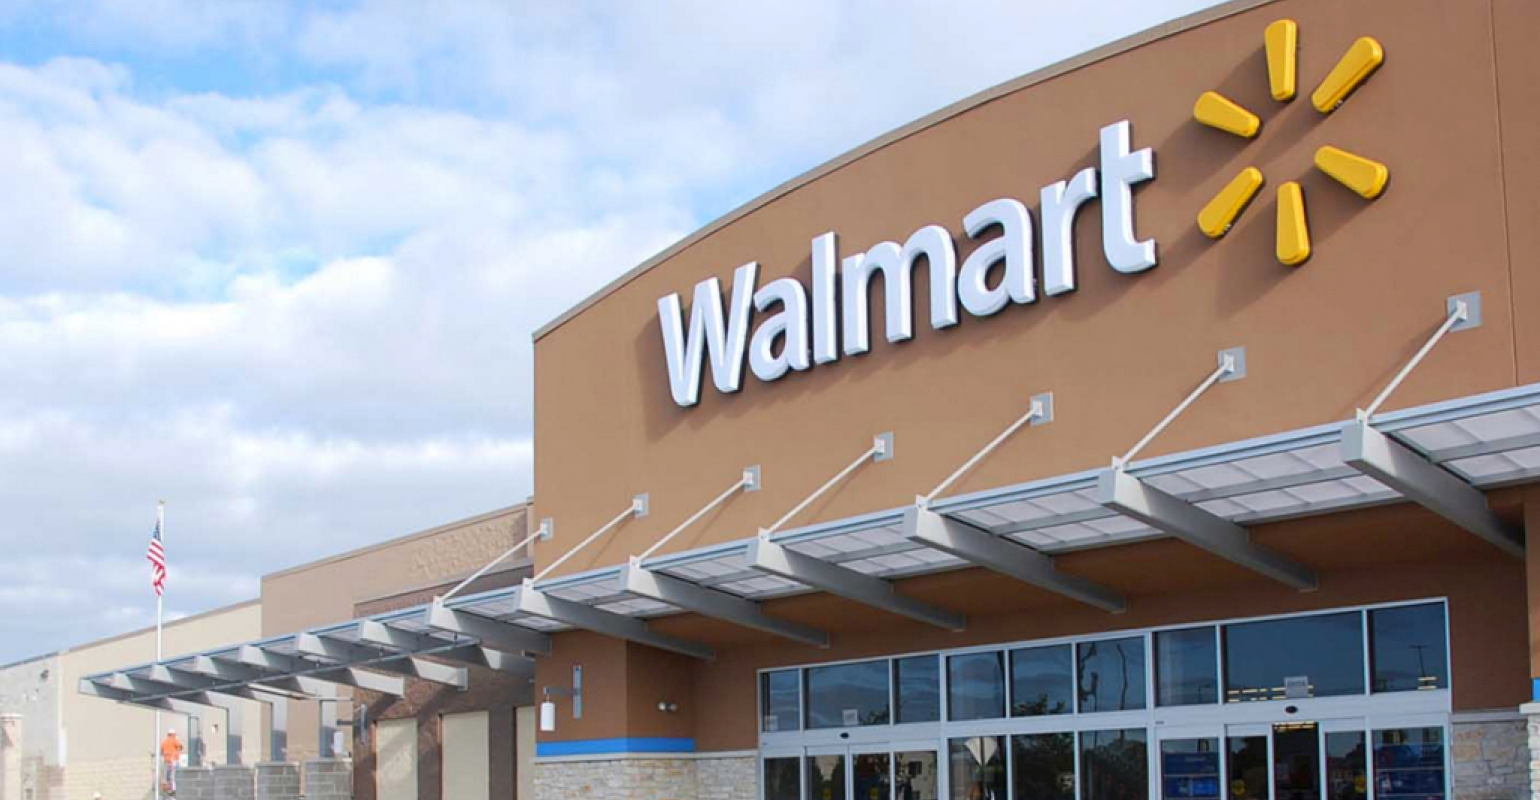 PDF) Financial Analysis of Retail Business Organization: A Case of Wal-Mart  Stores, Inc.